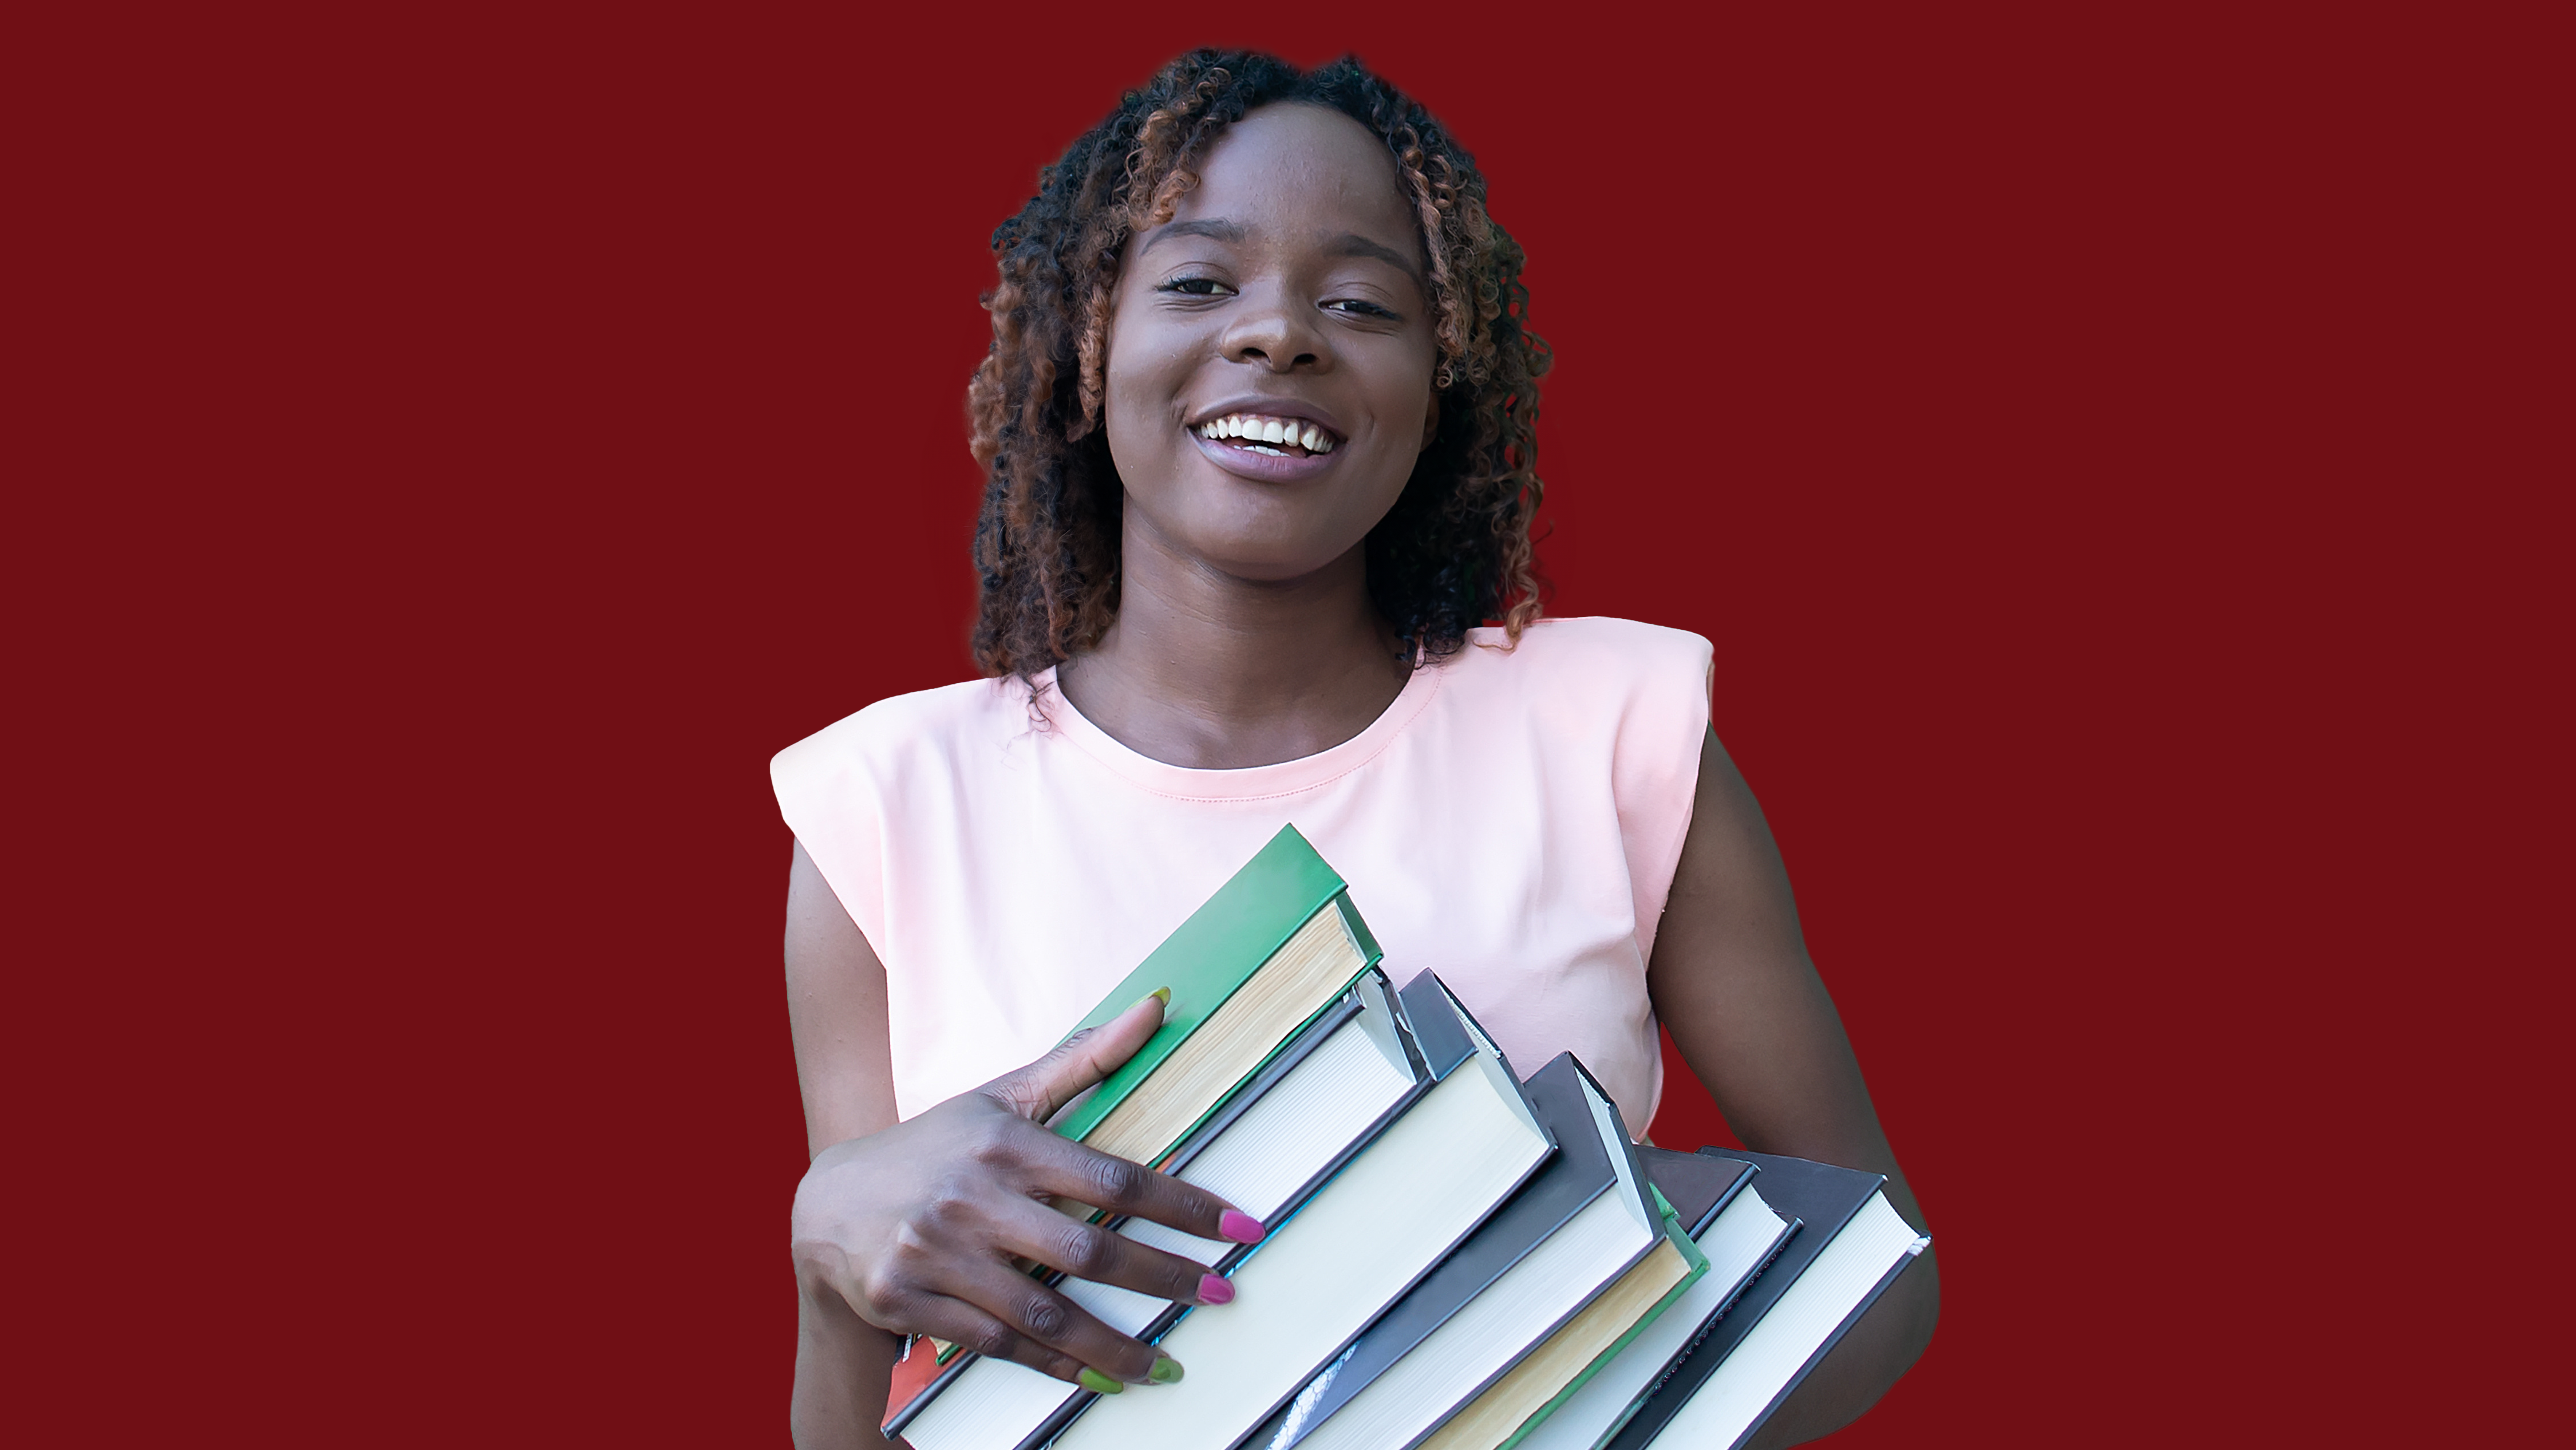 A young woman holding text books.